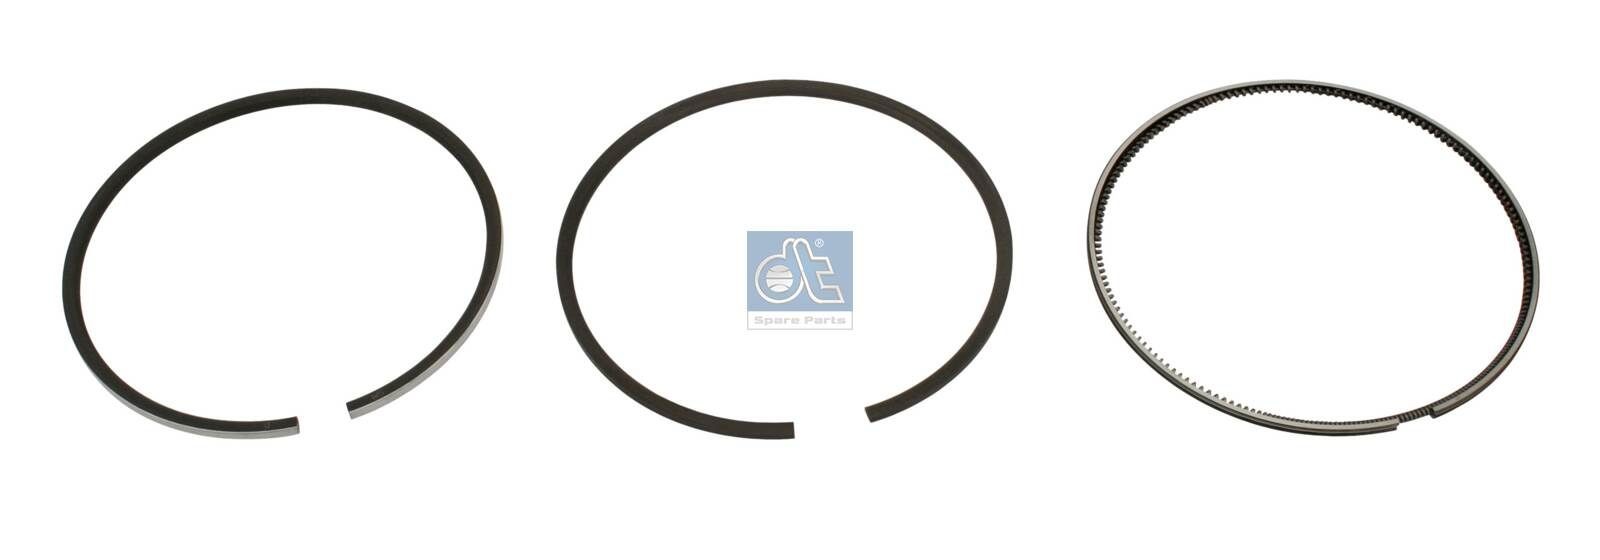 038 43 N0 DT Spare Parts 2.90097 Piston Ring Kit 205 099 32